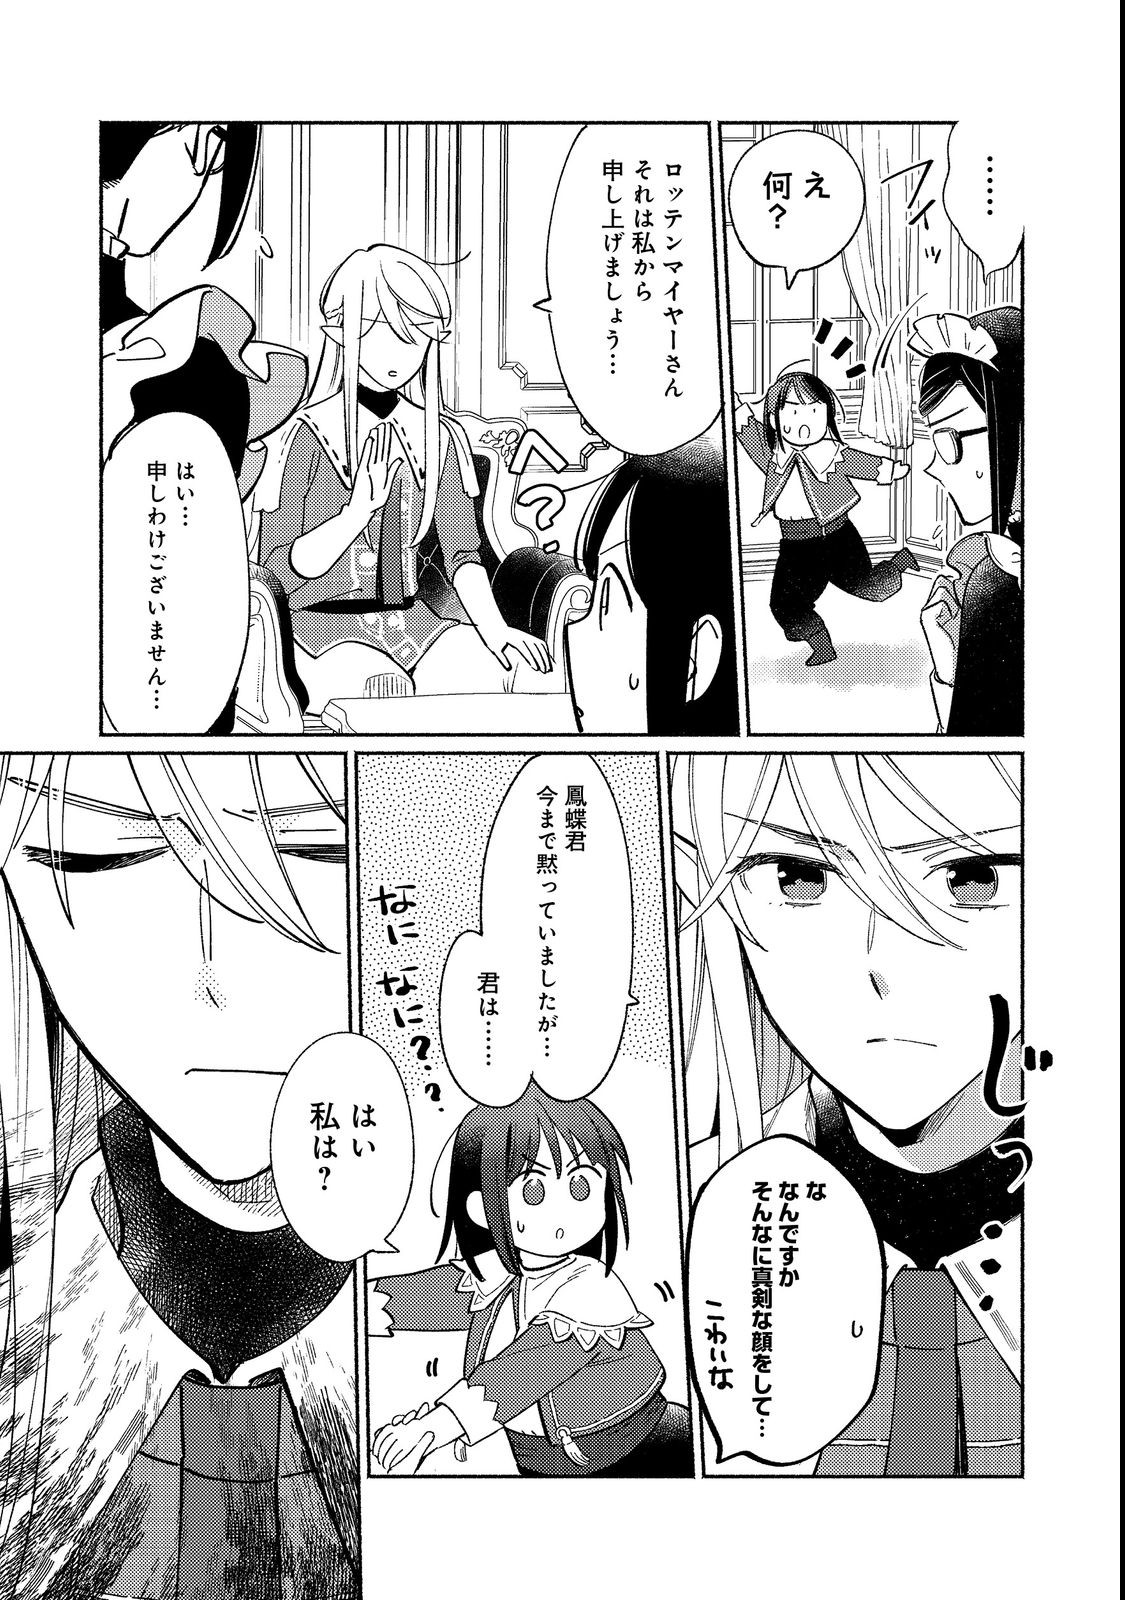 I’m the White Pig Nobleman 第17.2話 - Page 2